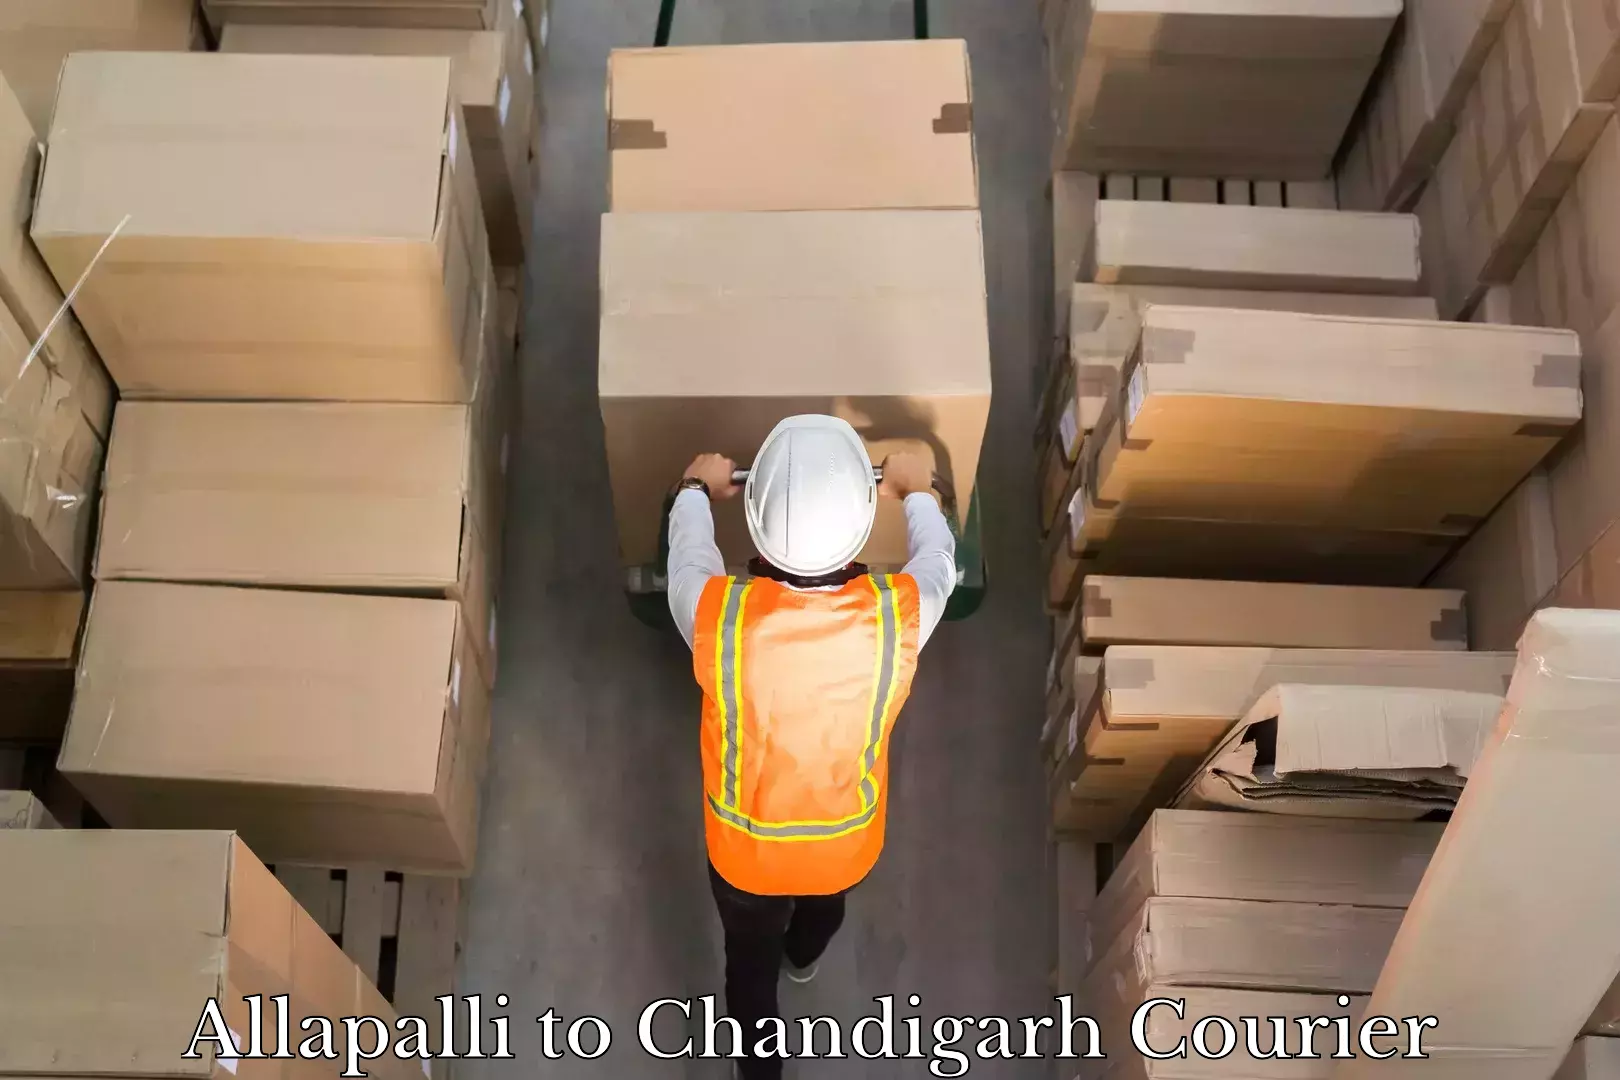 Reliable delivery network Allapalli to Chandigarh